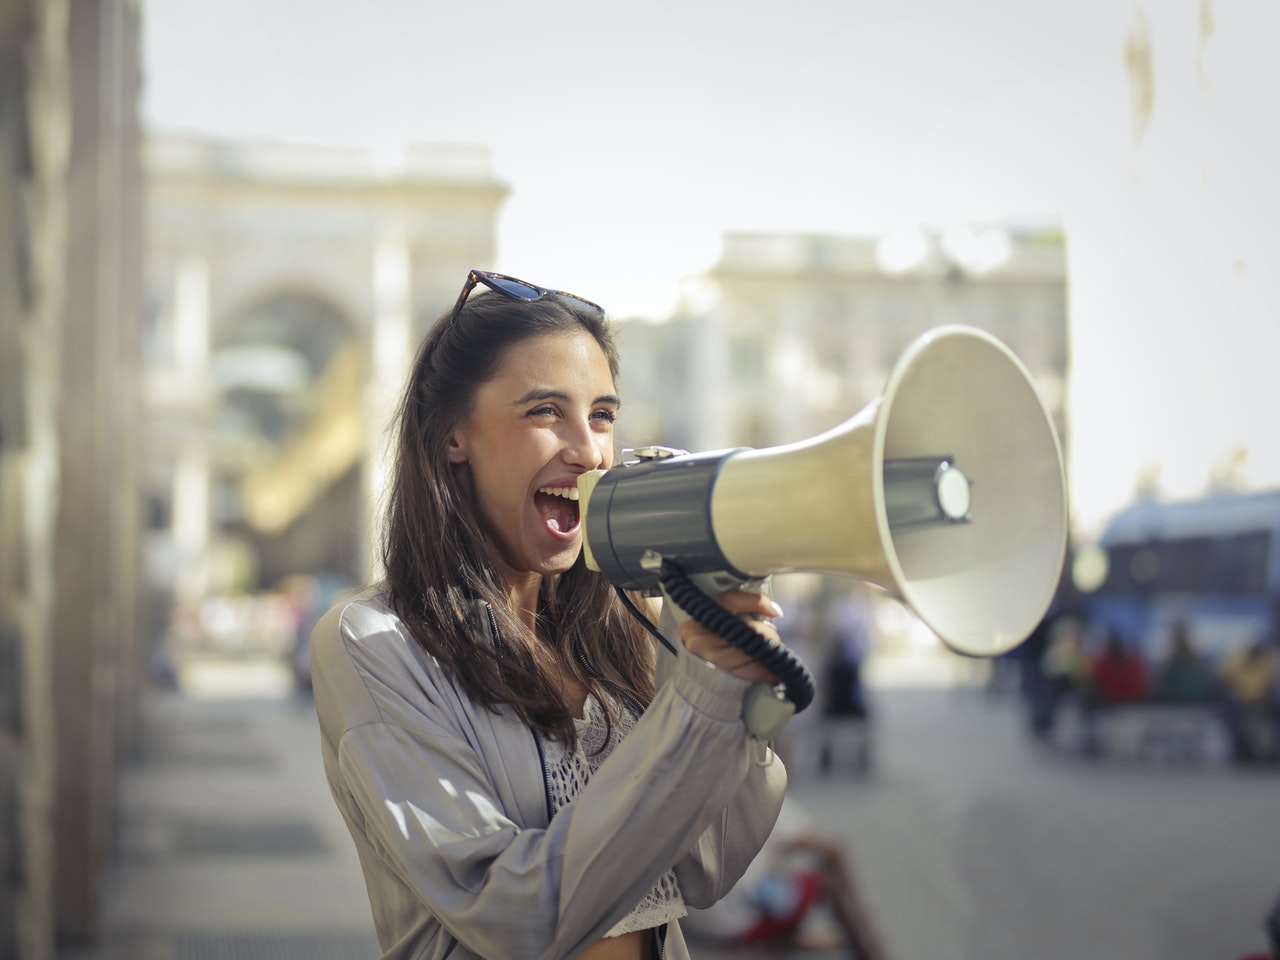 A young woman shouts into a large megaphone.